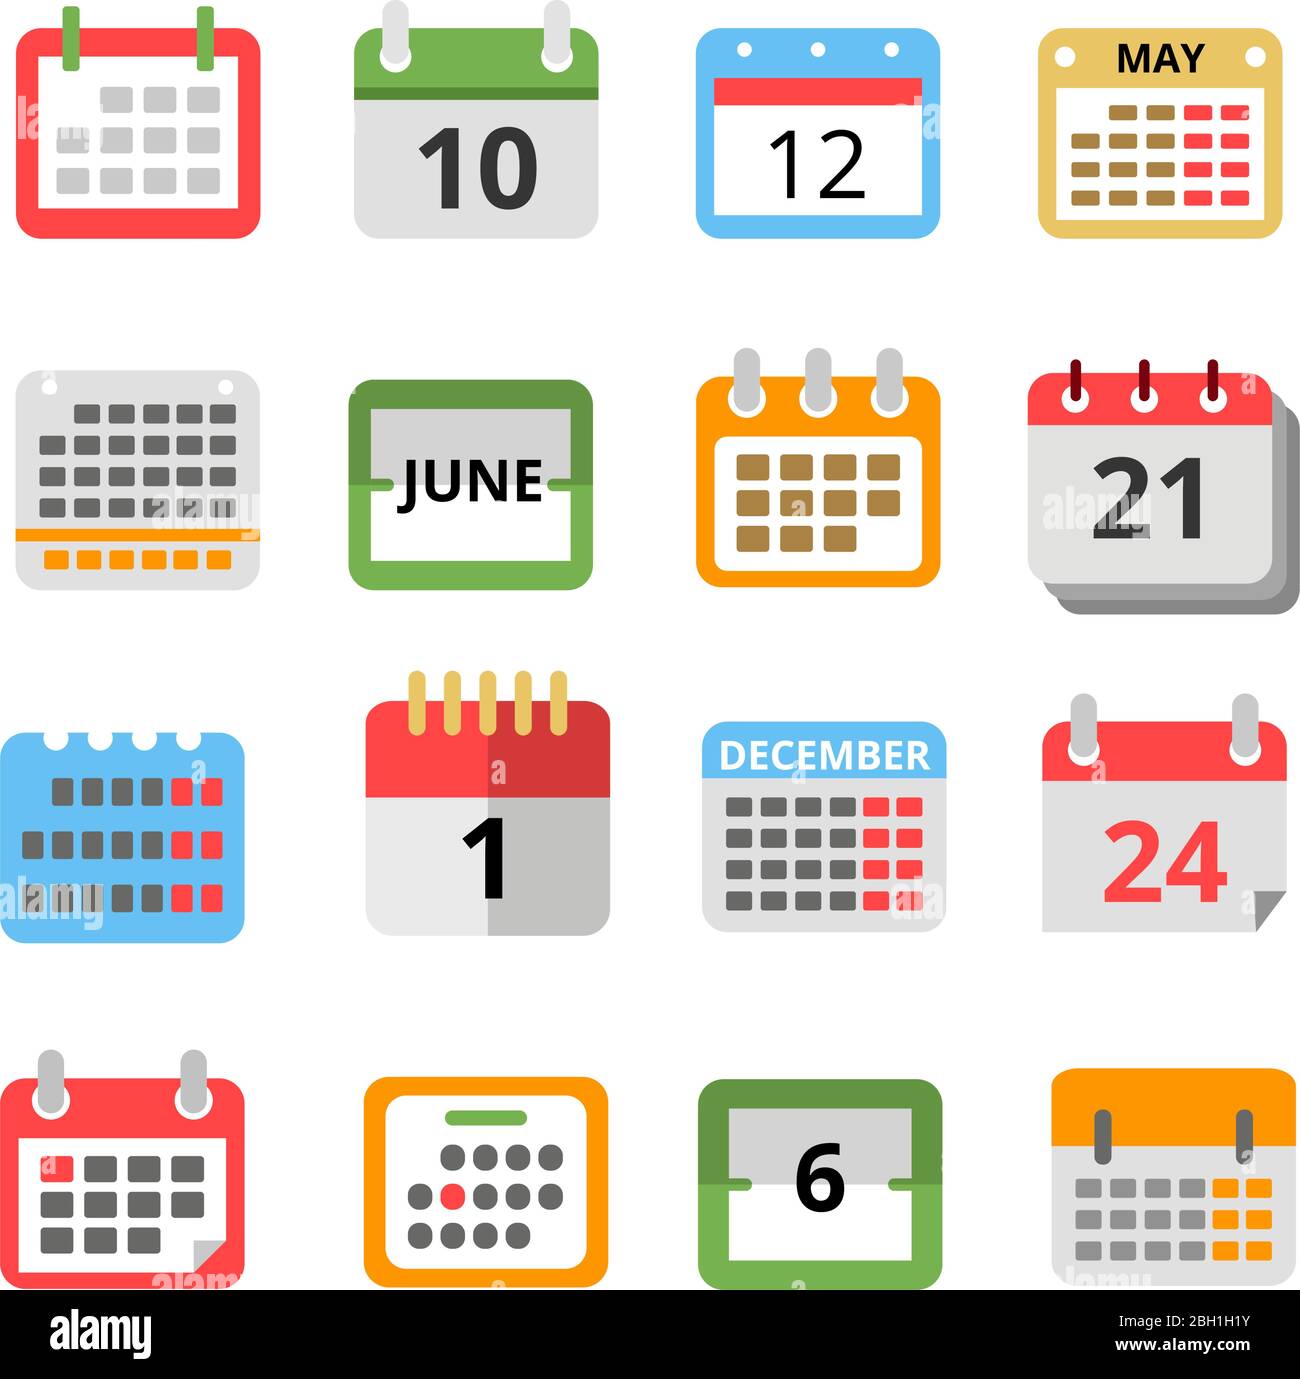 Set Of Different Calendars In Flat Style Vector Pictures Set Of